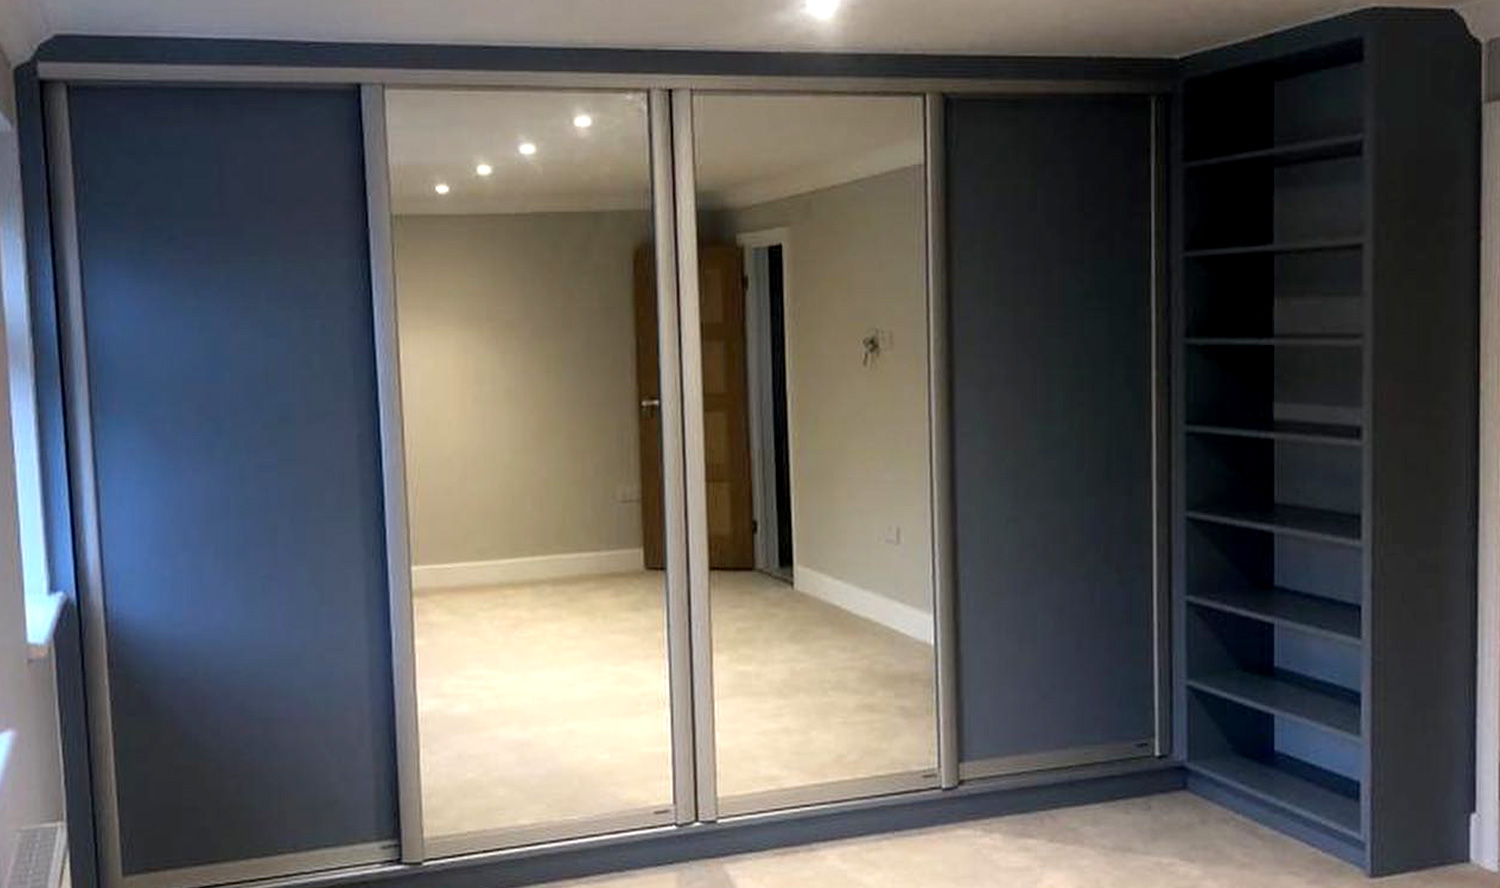 Get The Best Floor to Ceiling Wardrobe Mechanism and hardware in Bangalore, Floor to Ceiling Openable Wardrobes Bangalore that provides extra space.